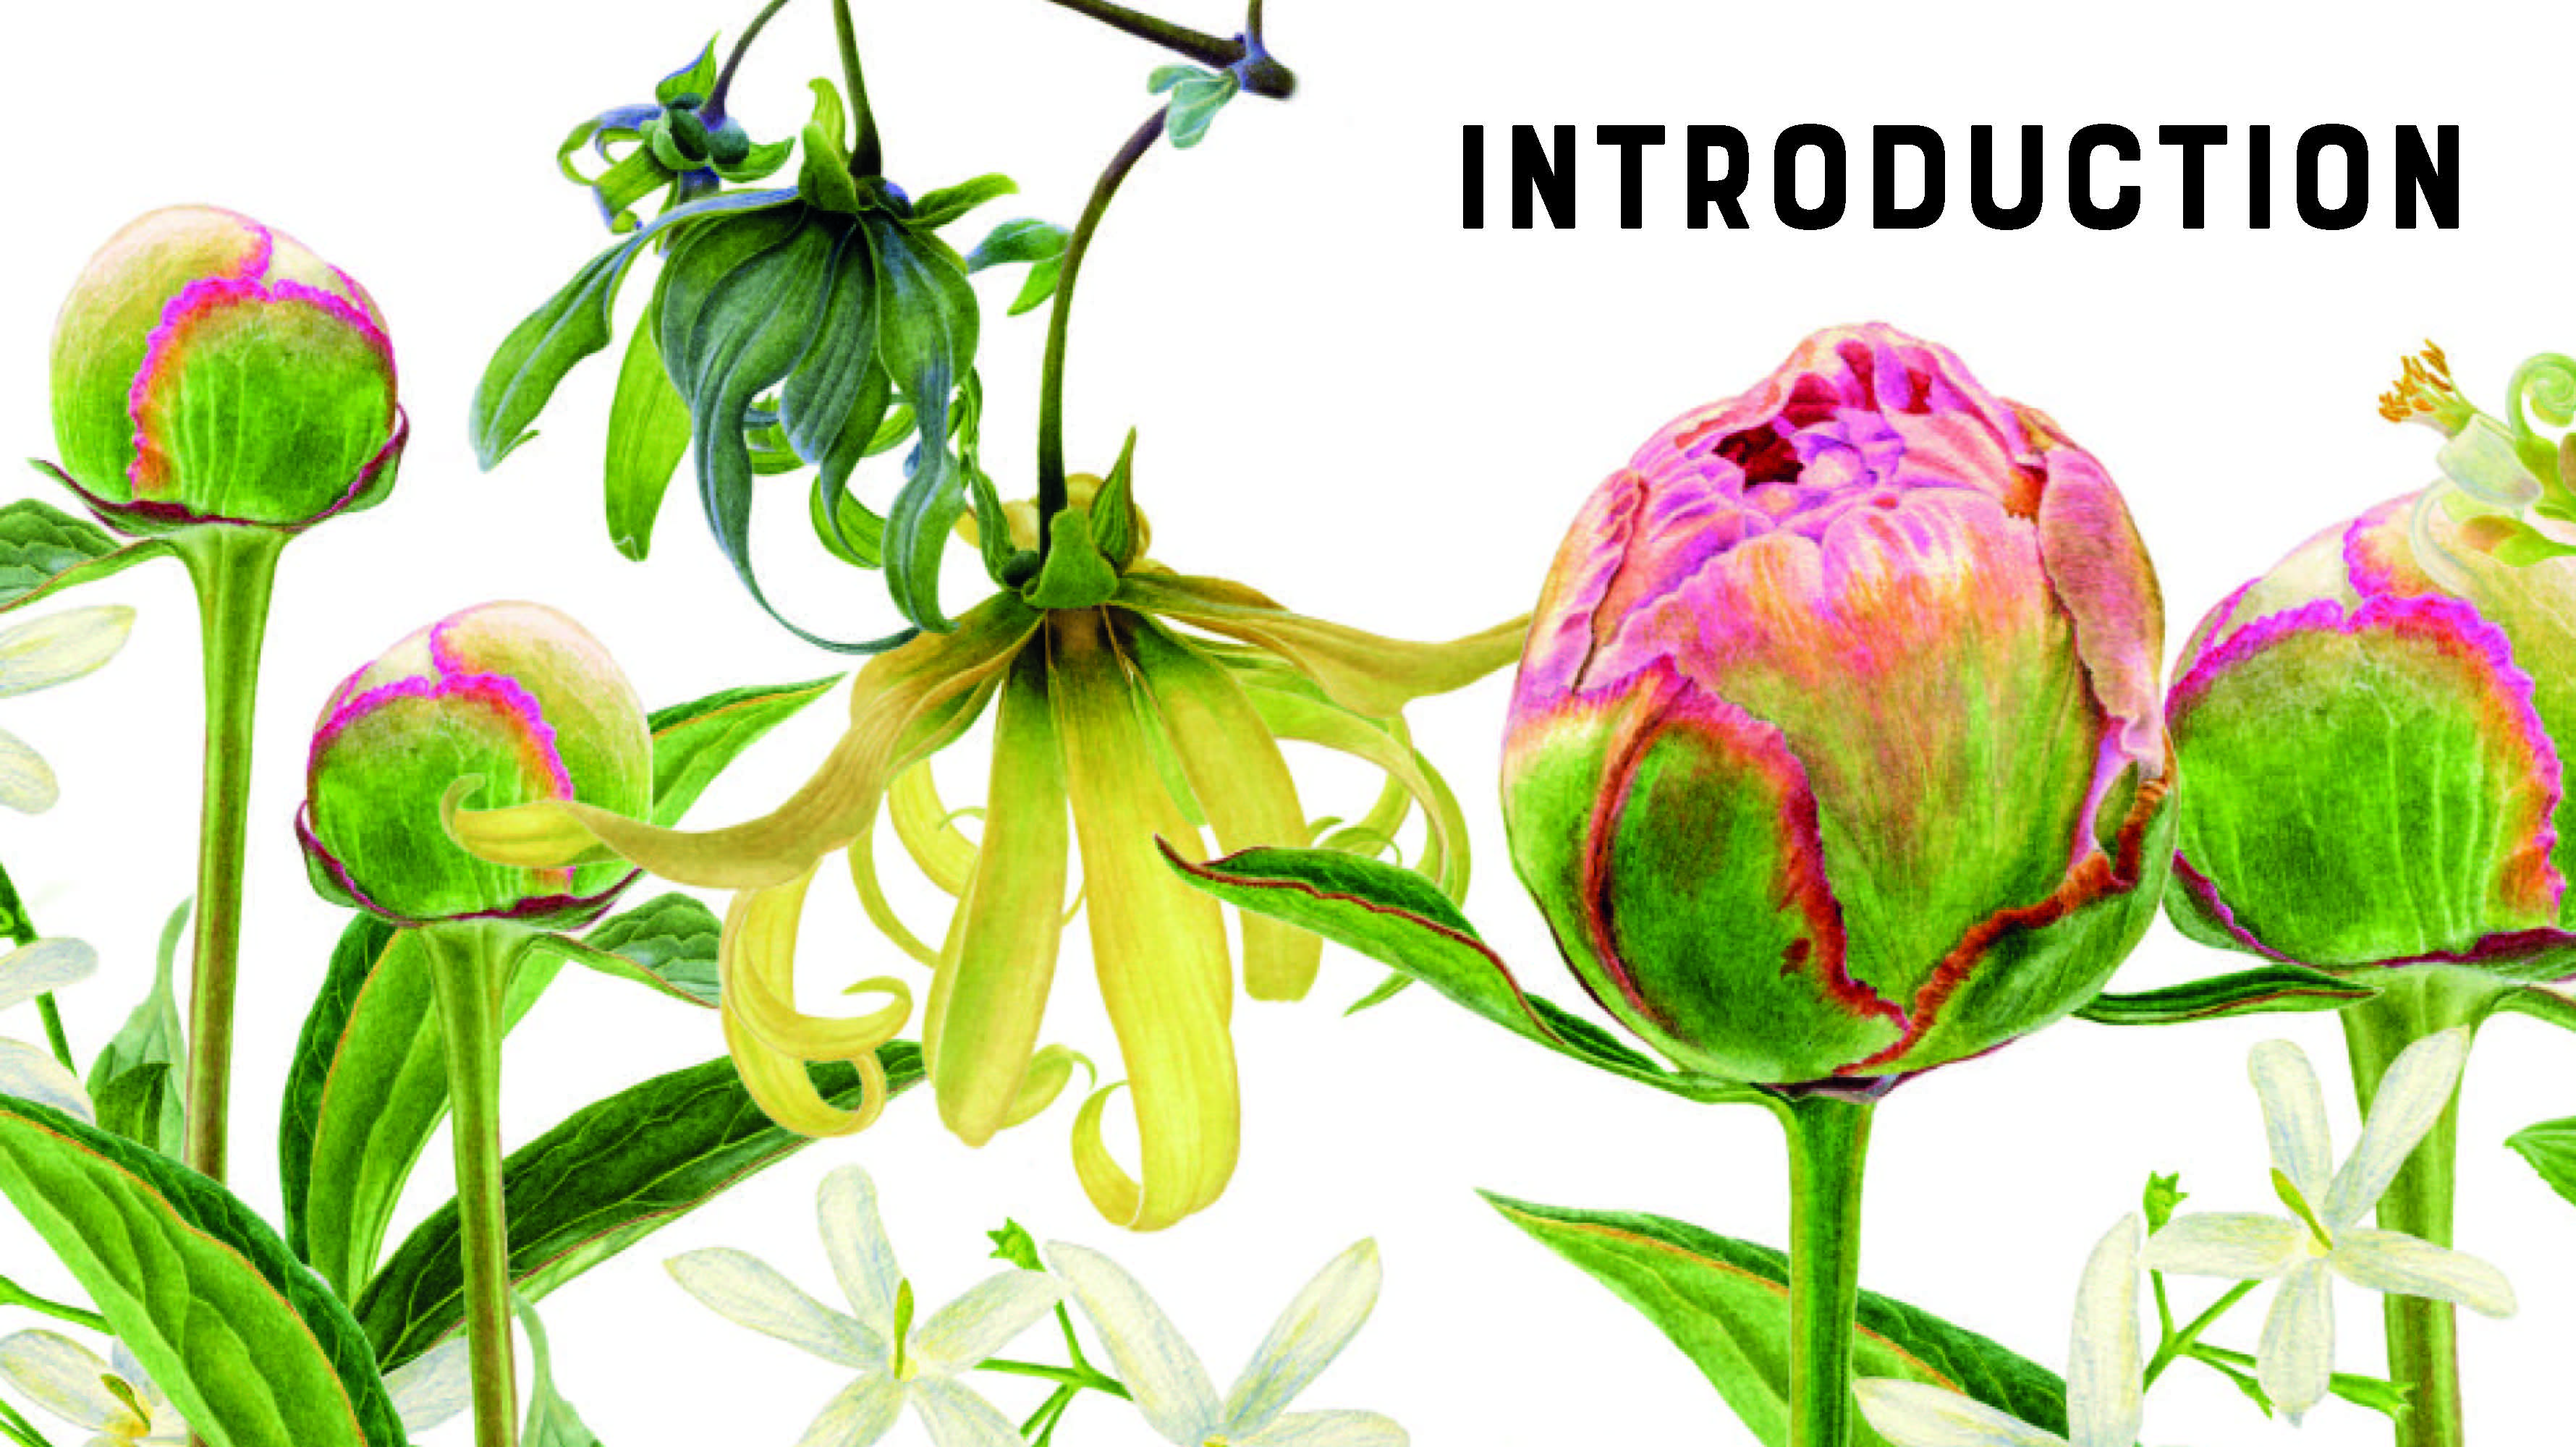 New Ideas in Botanical Painting